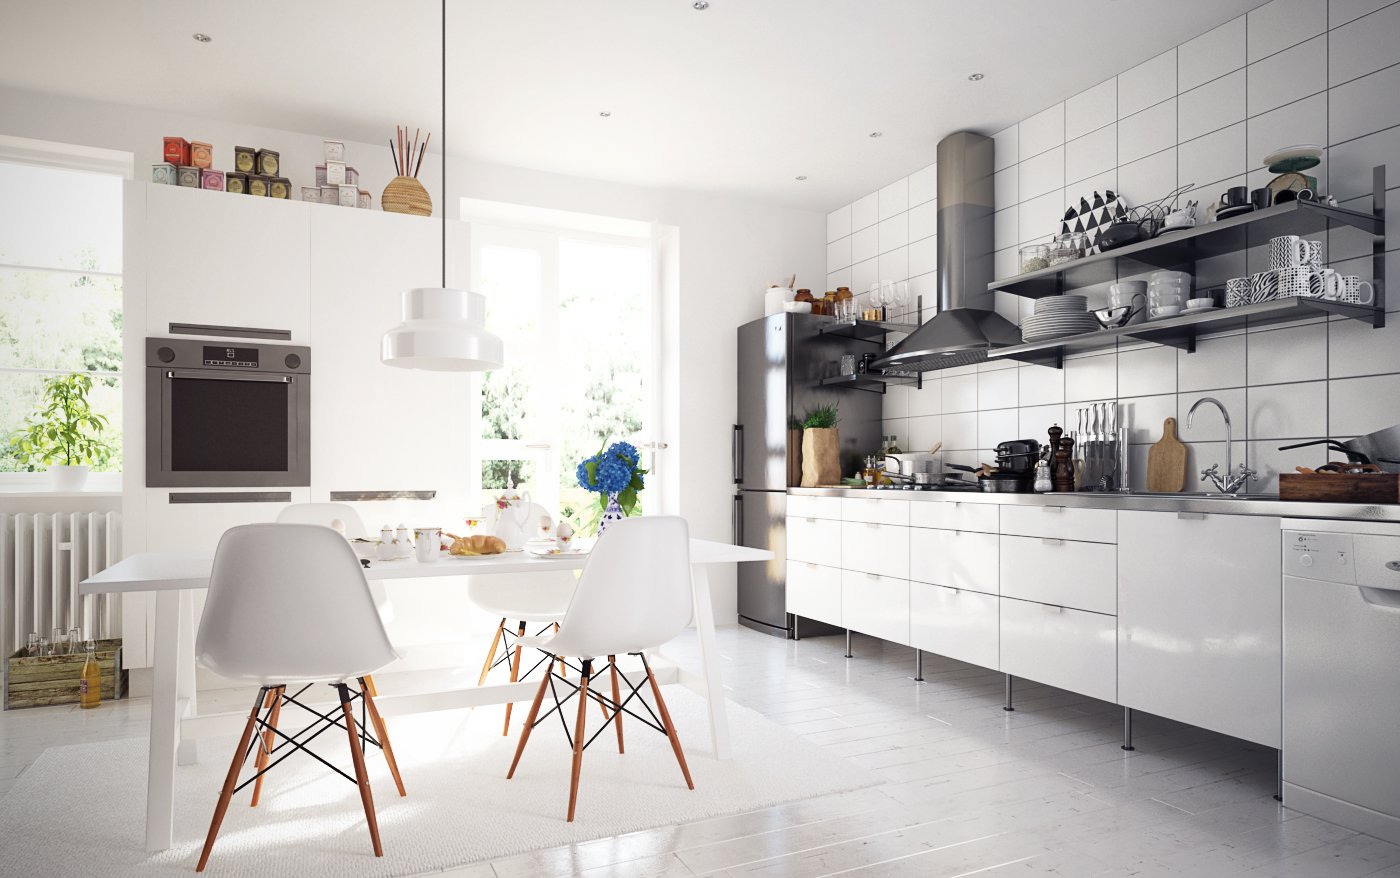 Swedish Kitchens : These Ten Swedish Kitchens Look Good Enough To Eat In The Local / Here we take a look at 3 renowned swedish kitchen studios shaking things up in the design world.